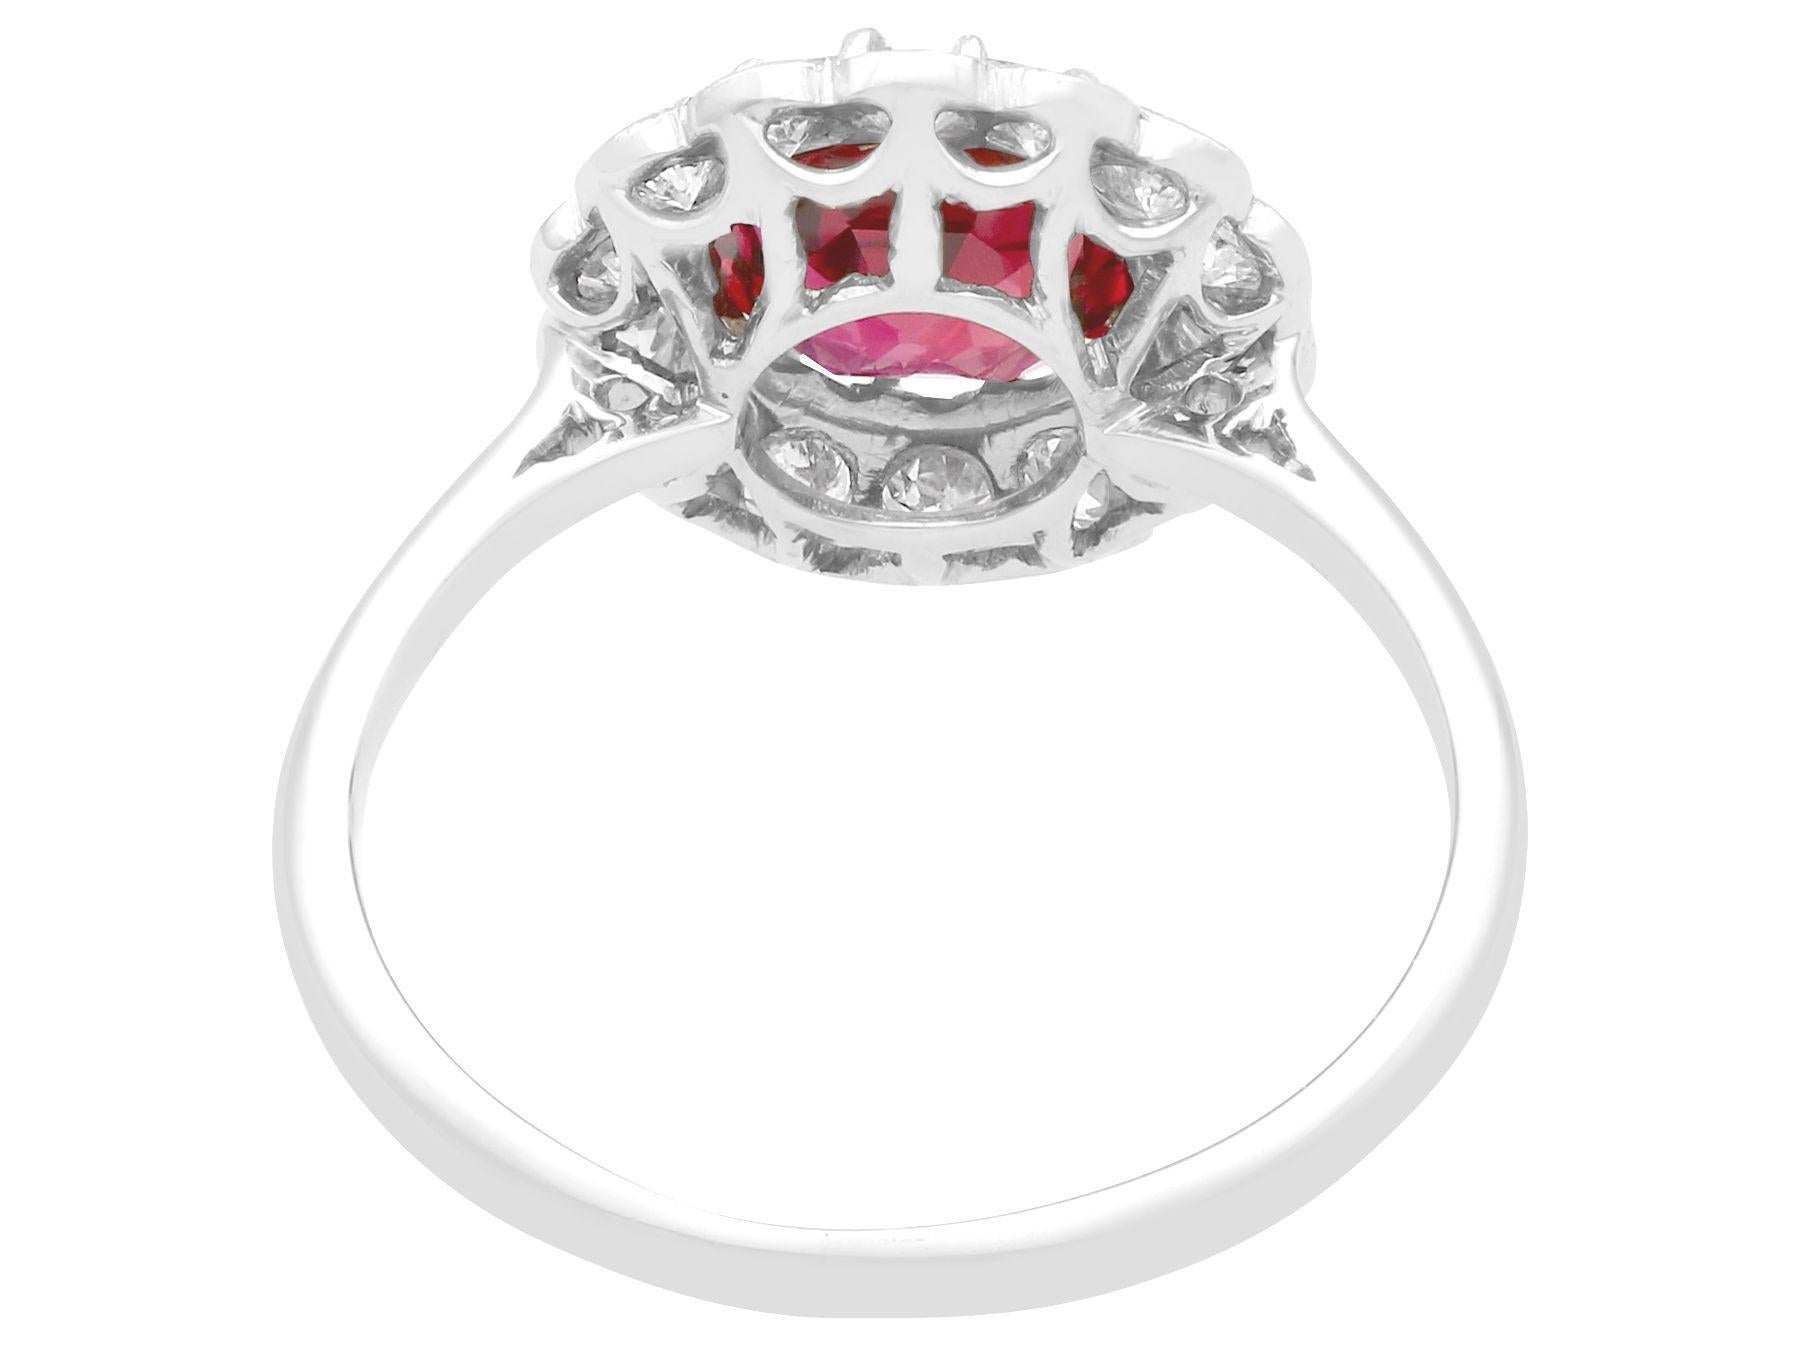 Vintage 1.70 Carat Thai Ruby Diamond White Gold Cluster Ring In Excellent Condition For Sale In Jesmond, Newcastle Upon Tyne